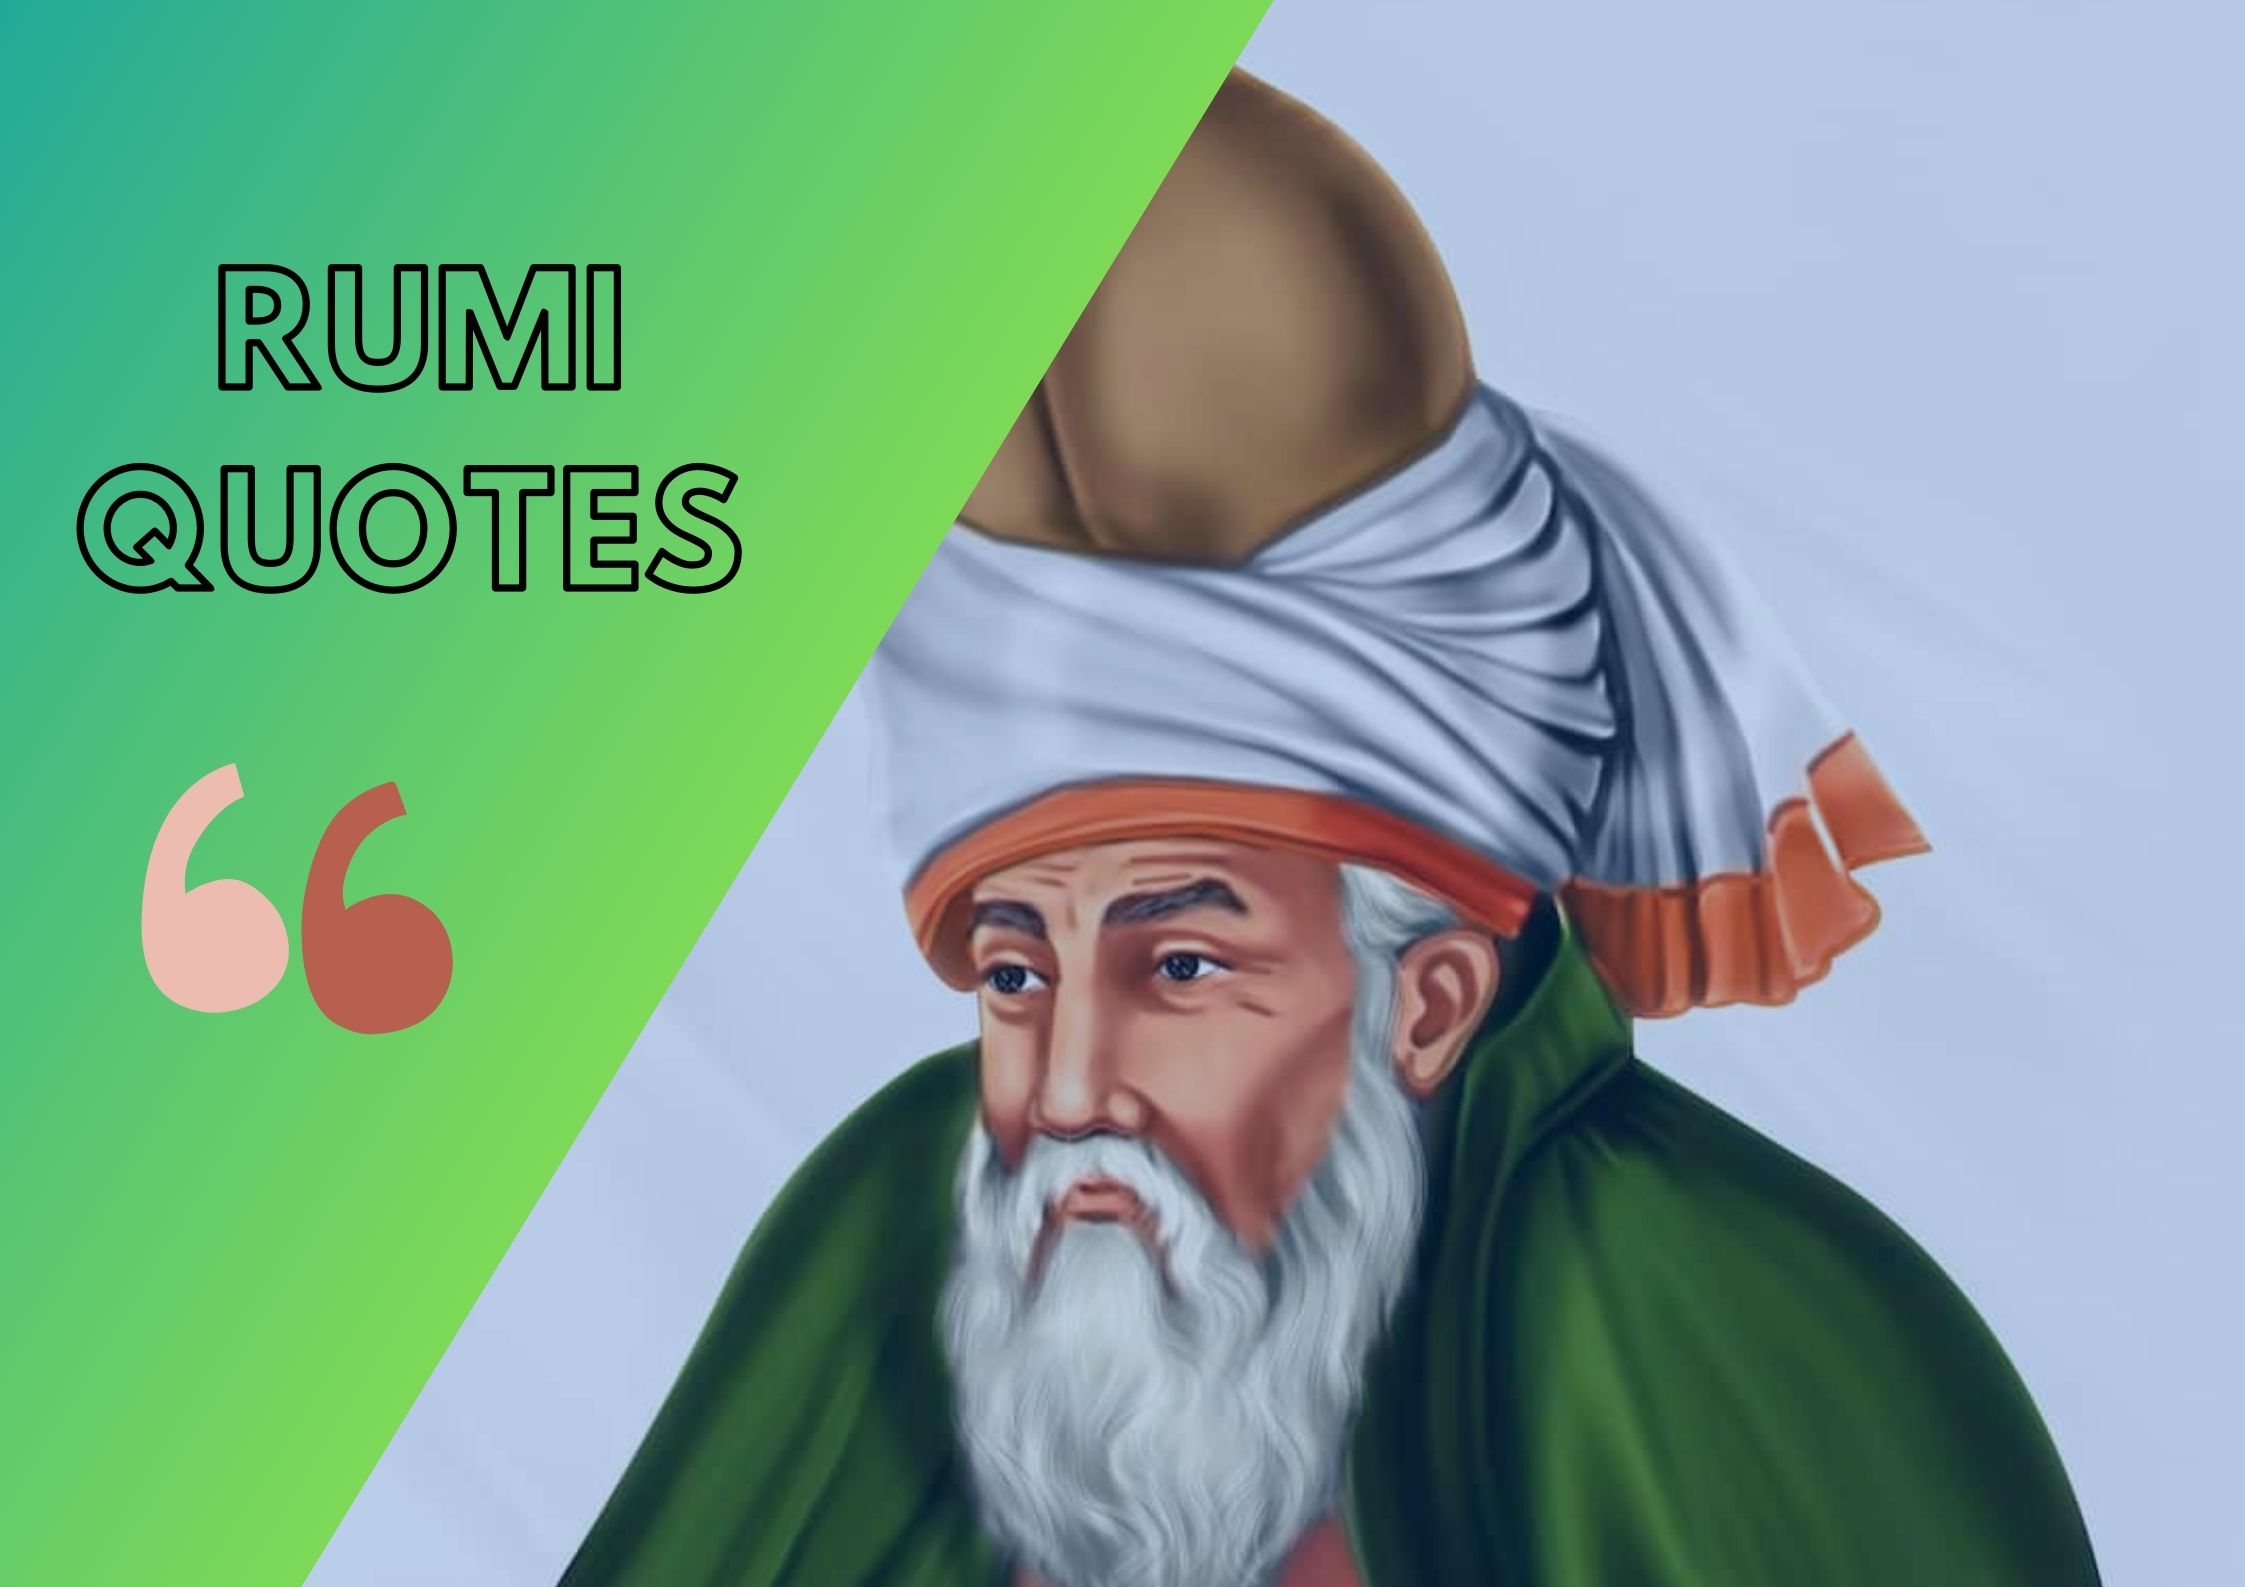 100+ Rumi Quotes to inspire you on the path of life